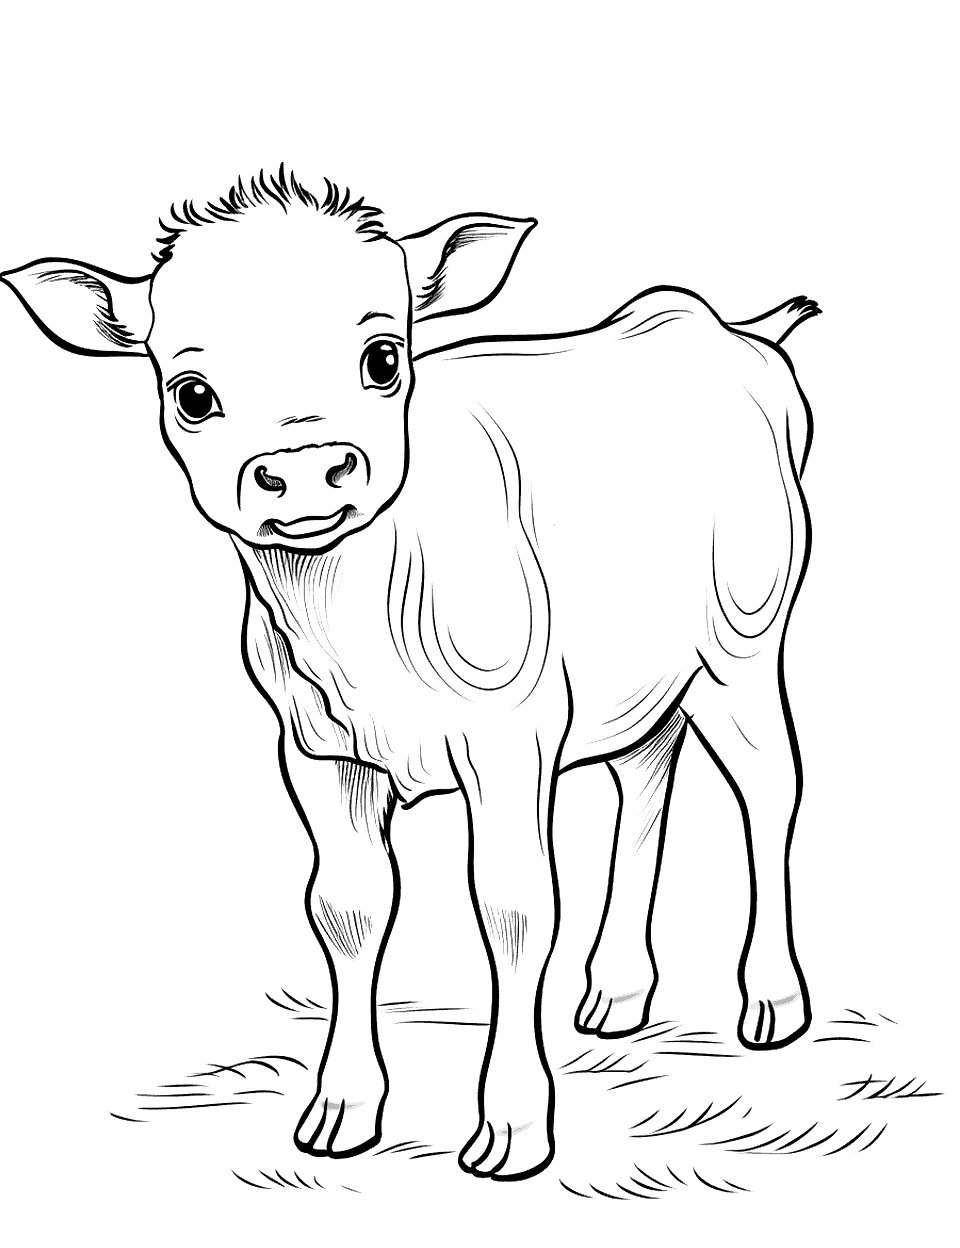 Calf Learning to Walk Farm Coloring Page - A young calf taking its first steps.